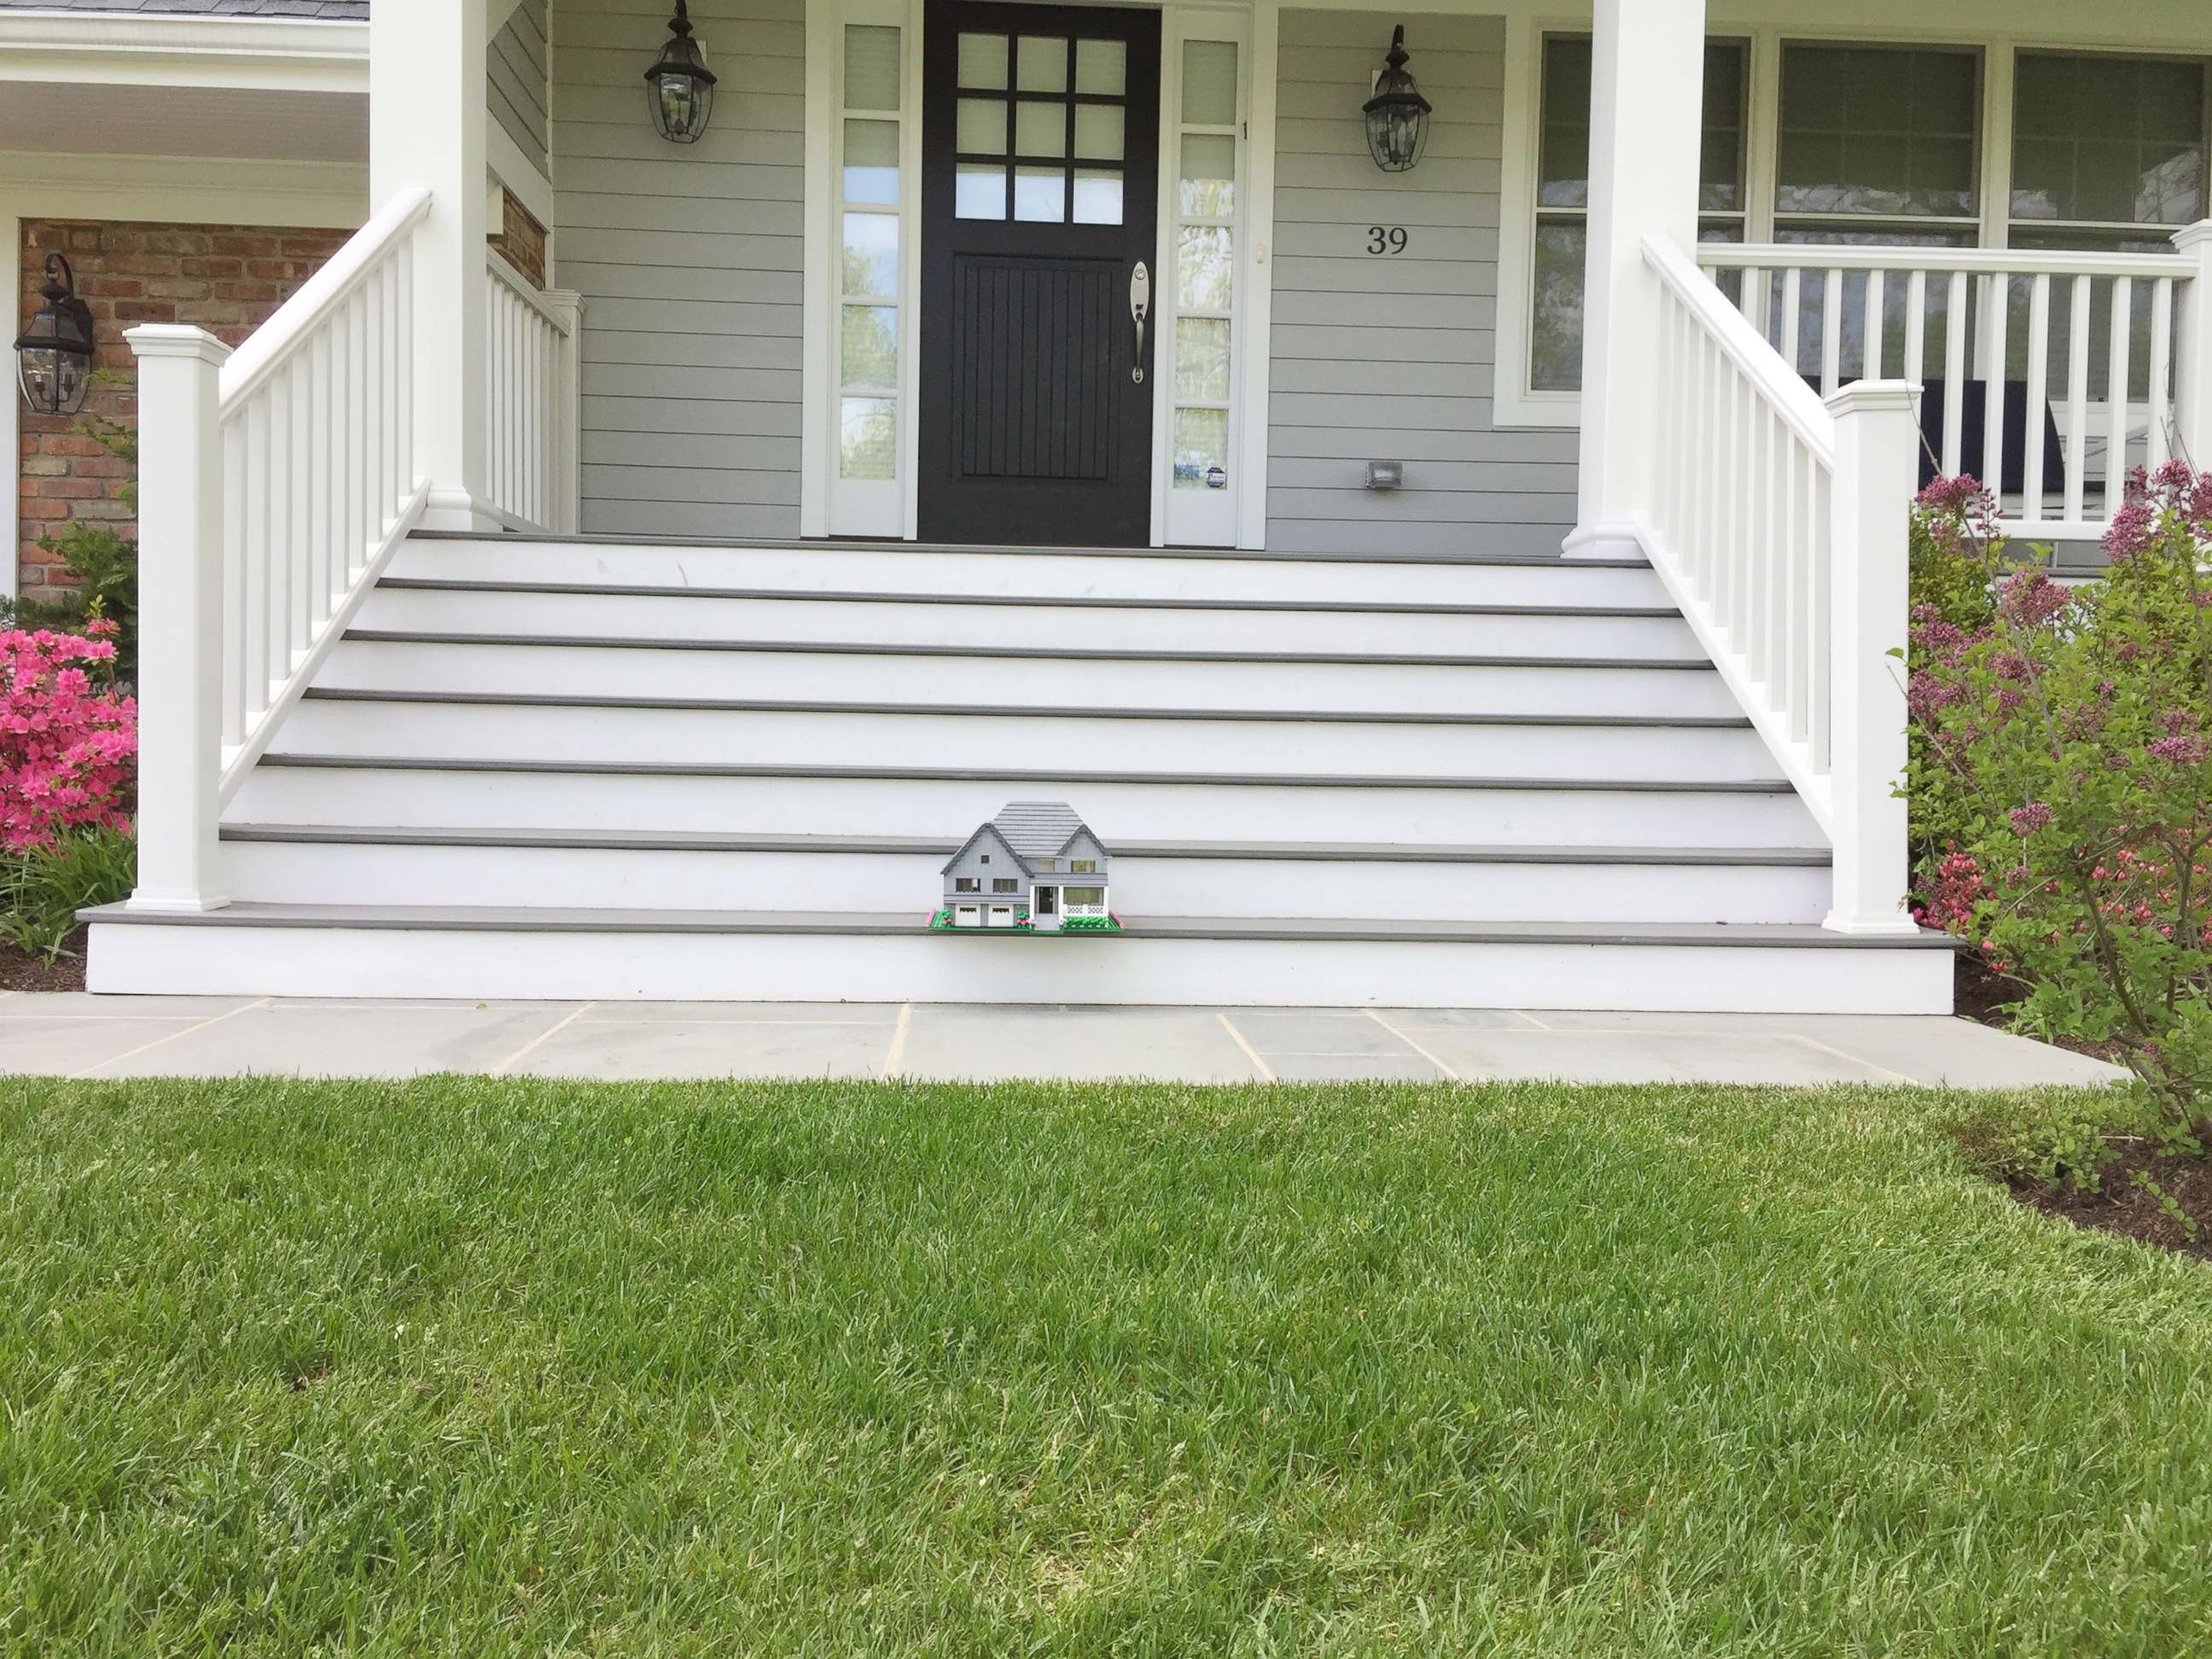 PHOTO: A Lego home built by Shari Austrian sits on the front steps of the actual home.